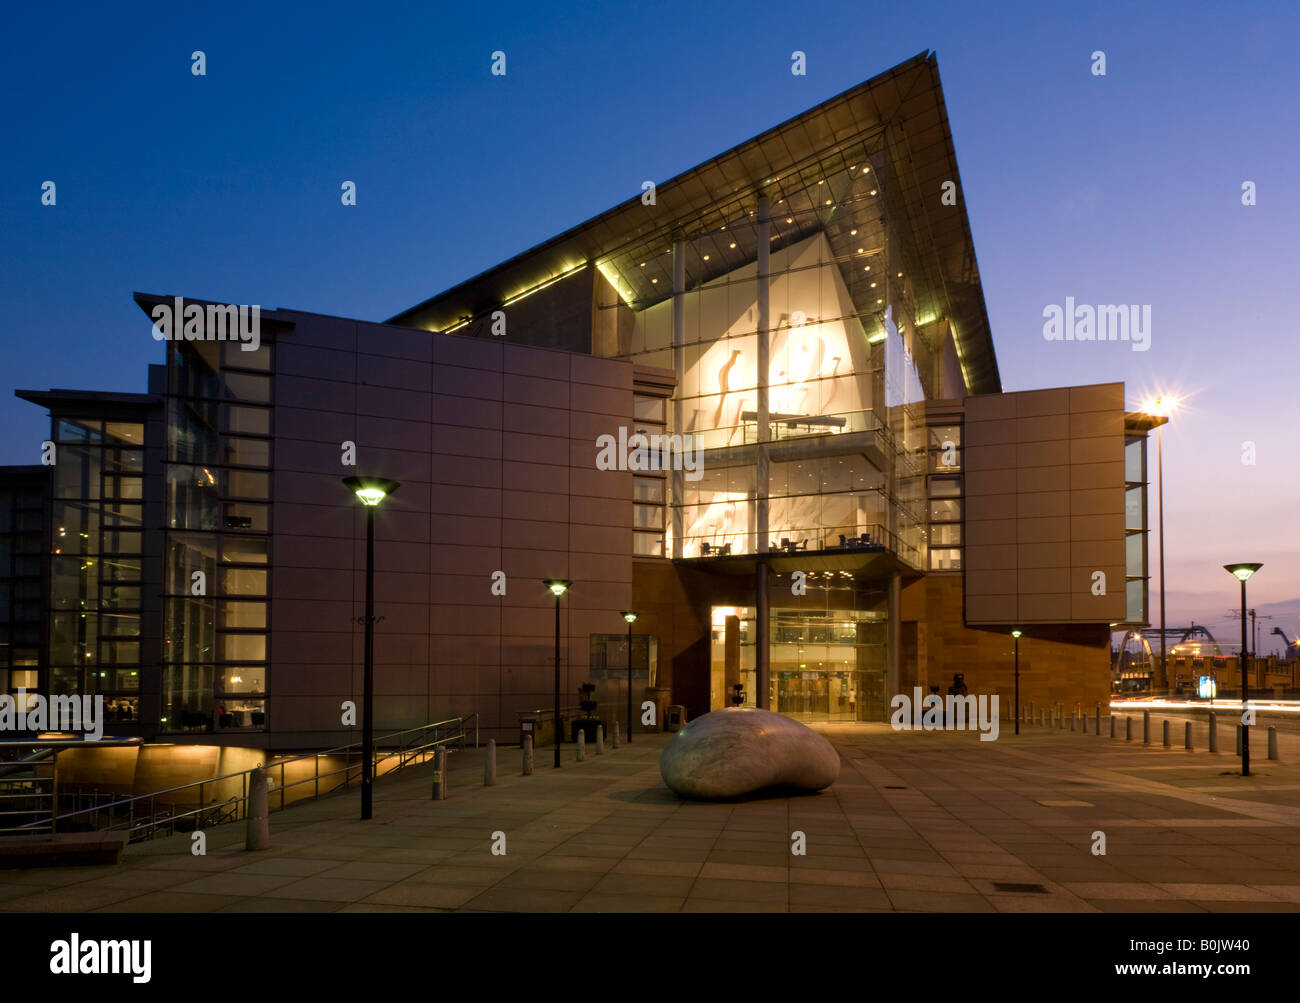 Bridgewater Hall at night. Manchester, Greater Manchester, United Kingdom. Stock Photo